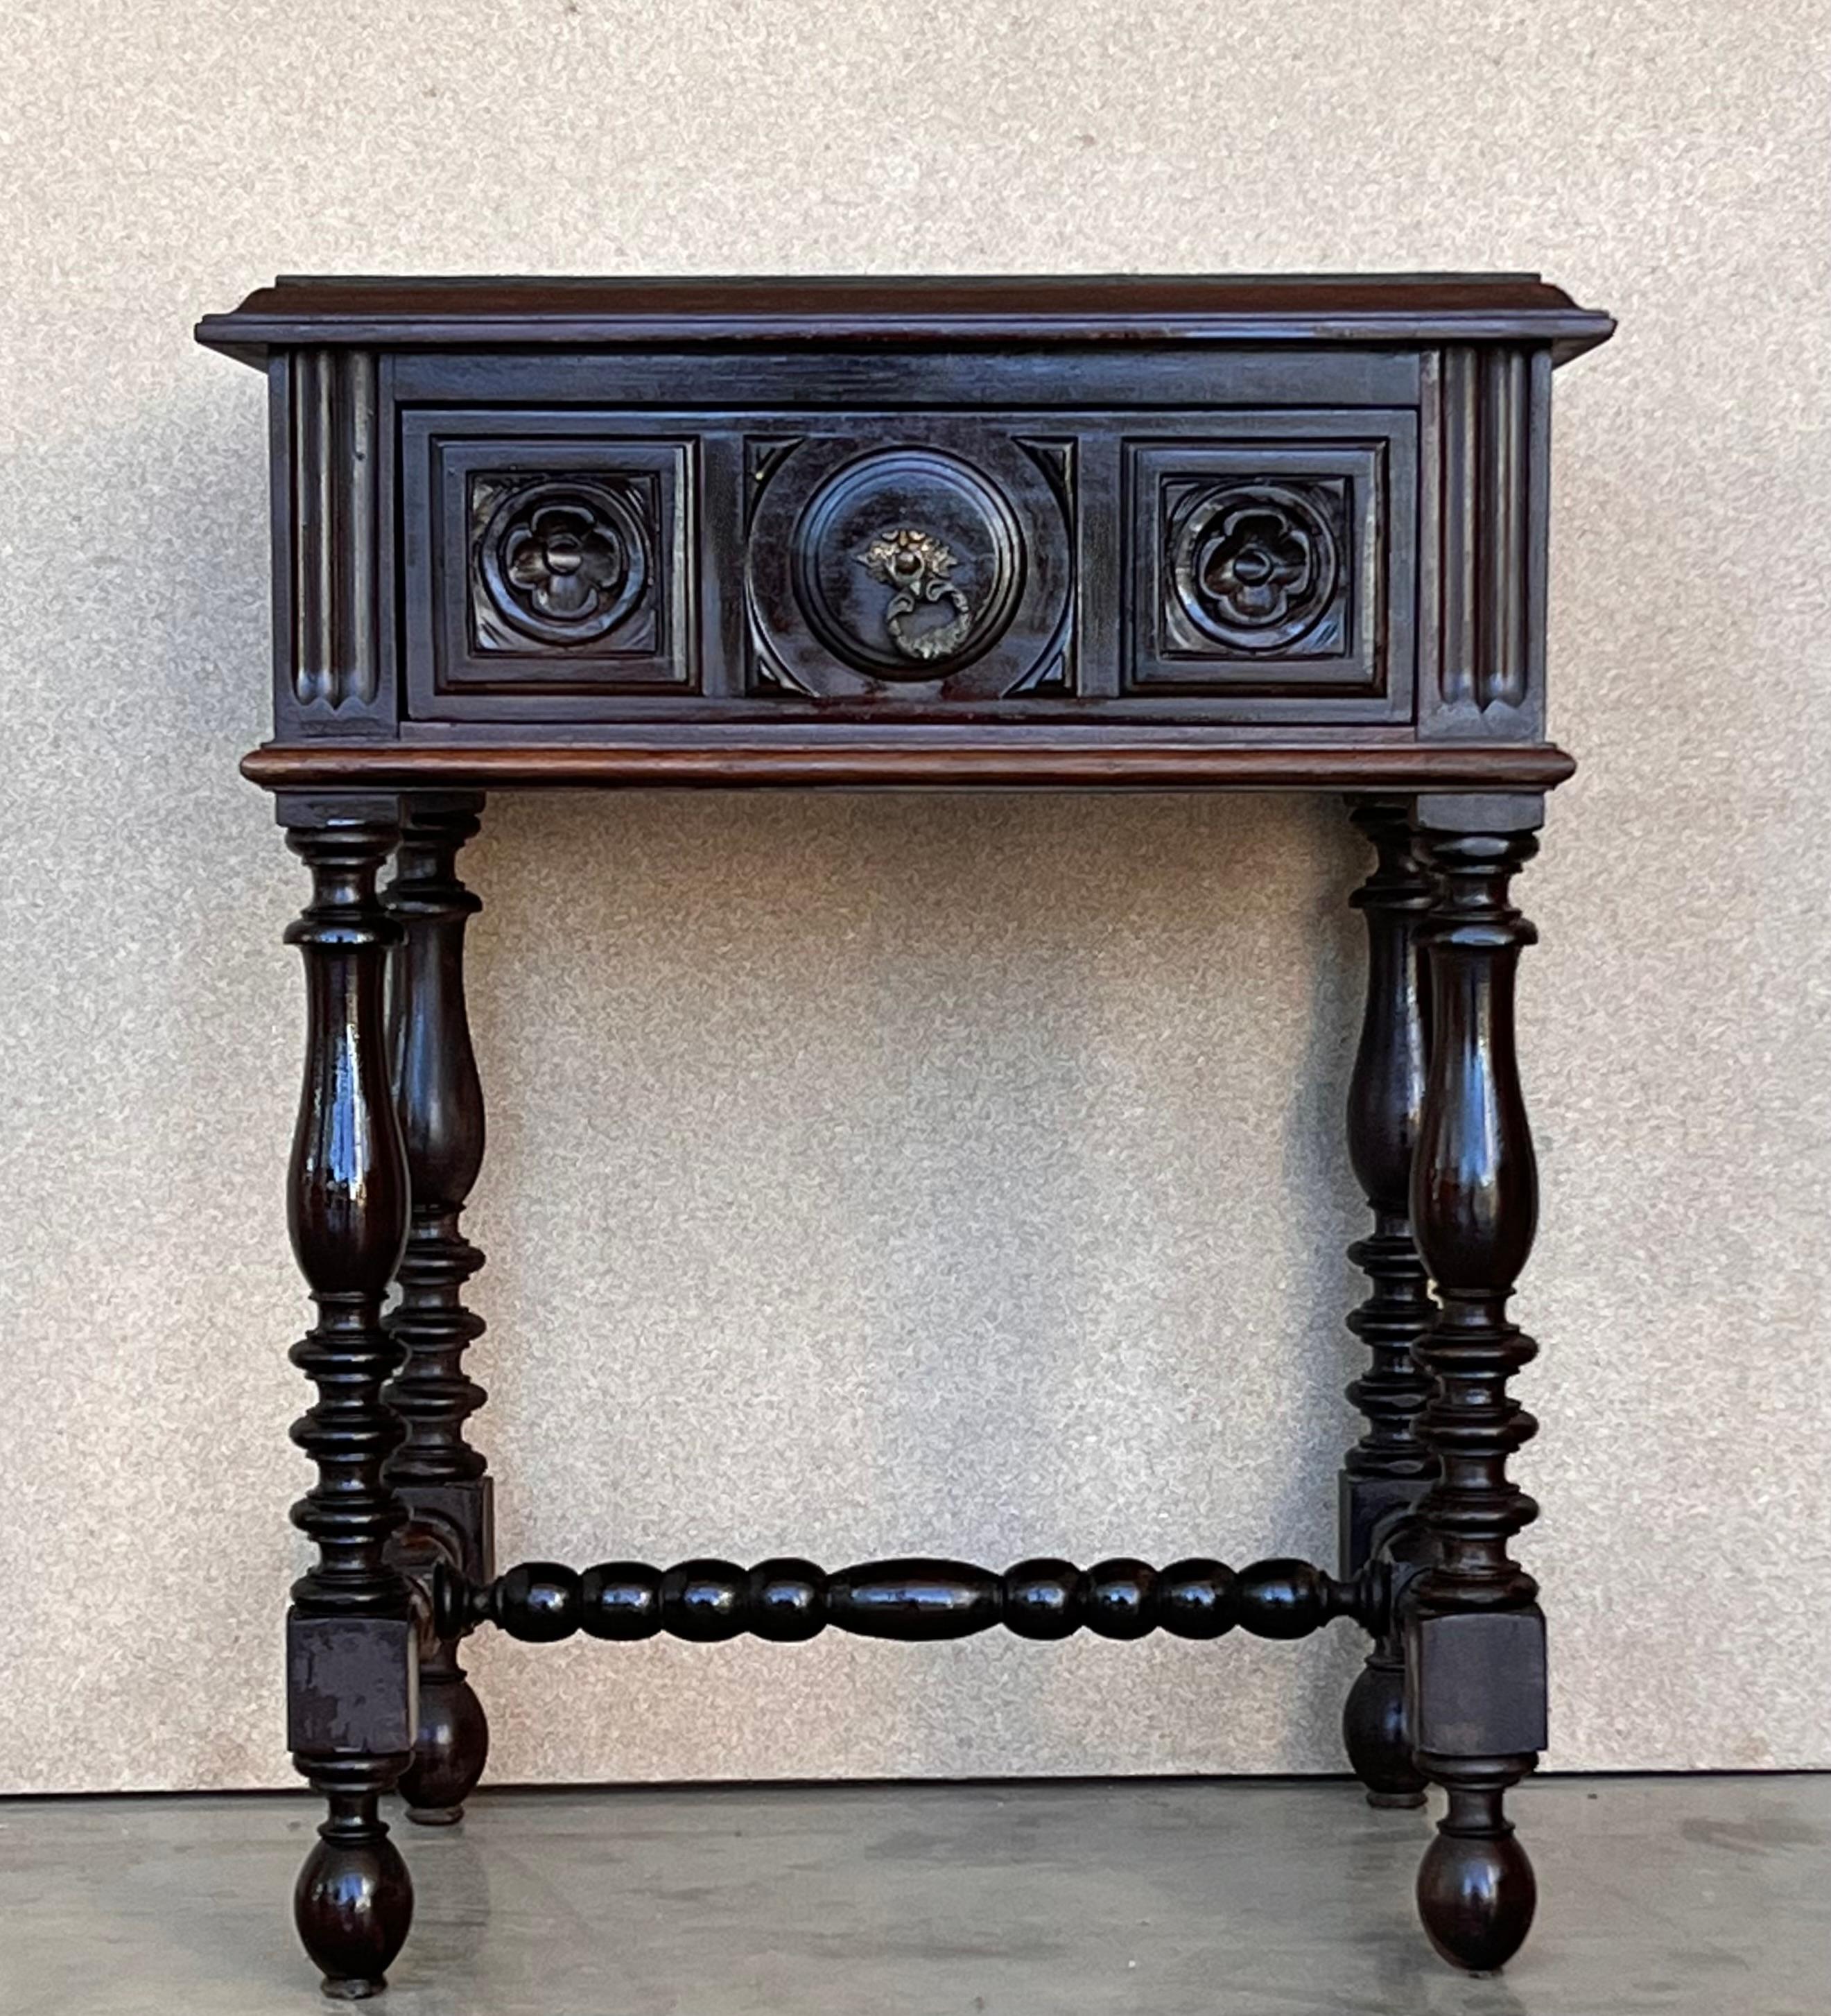 Spanish Colonial 20th Pair of Spanish Nightstands with Carved Drawer and beautiful stretcher For Sale